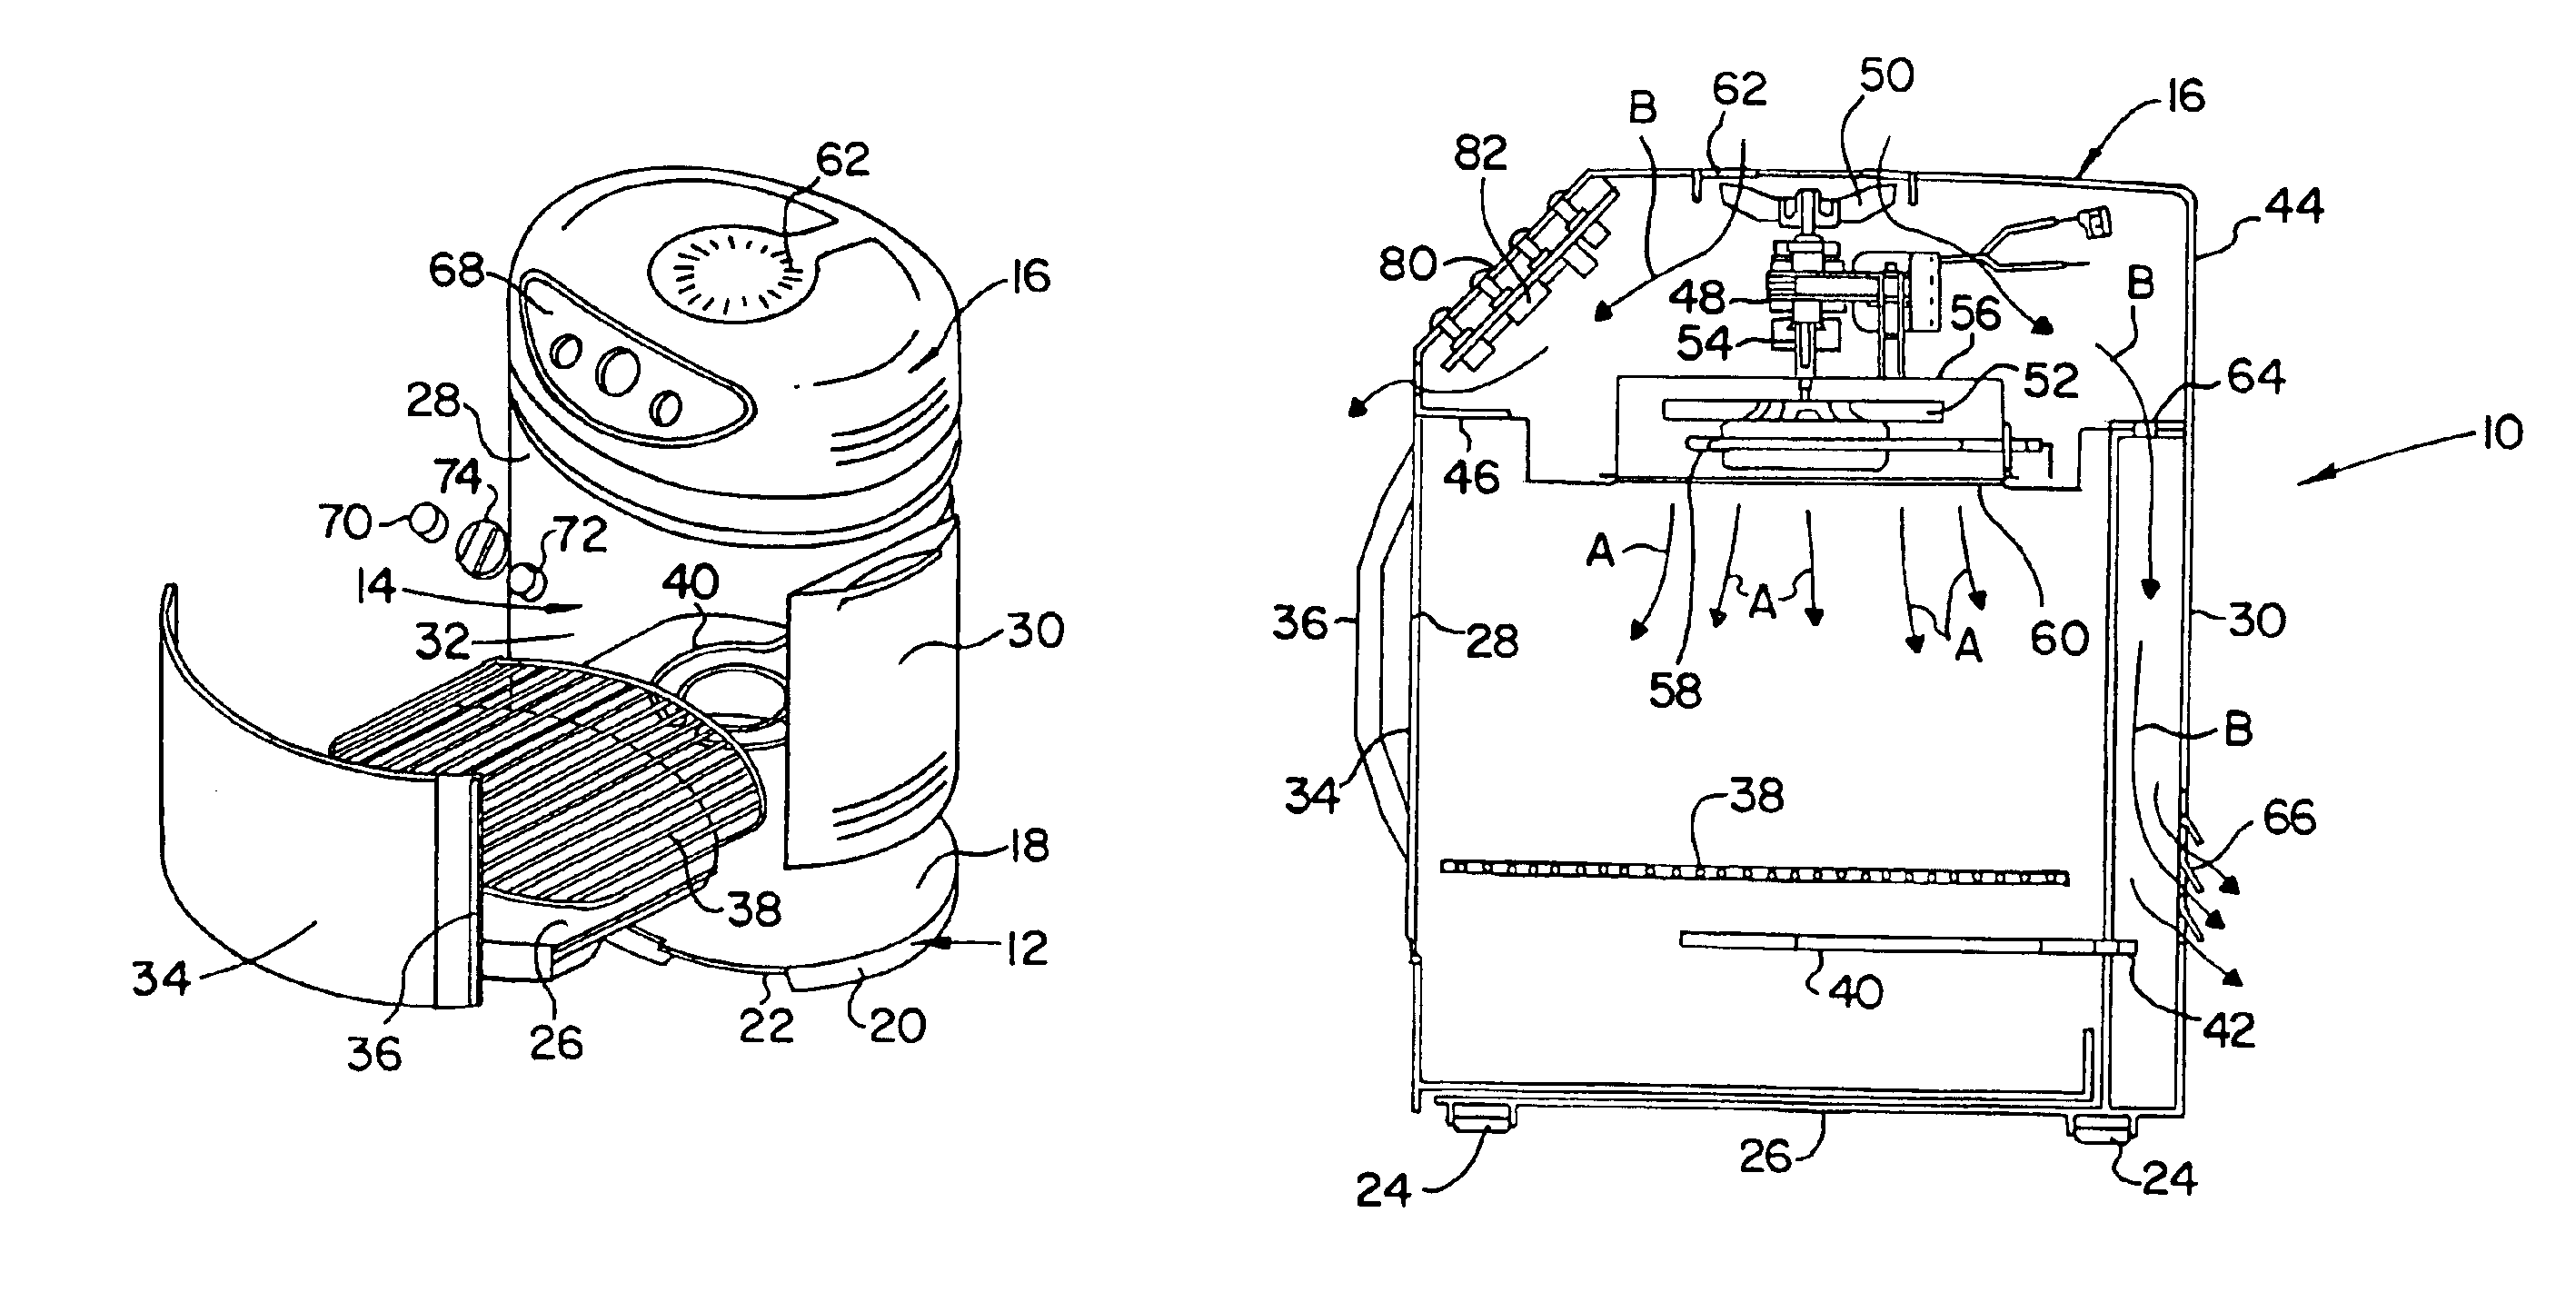 Counter-top cooker having multiple heating elements